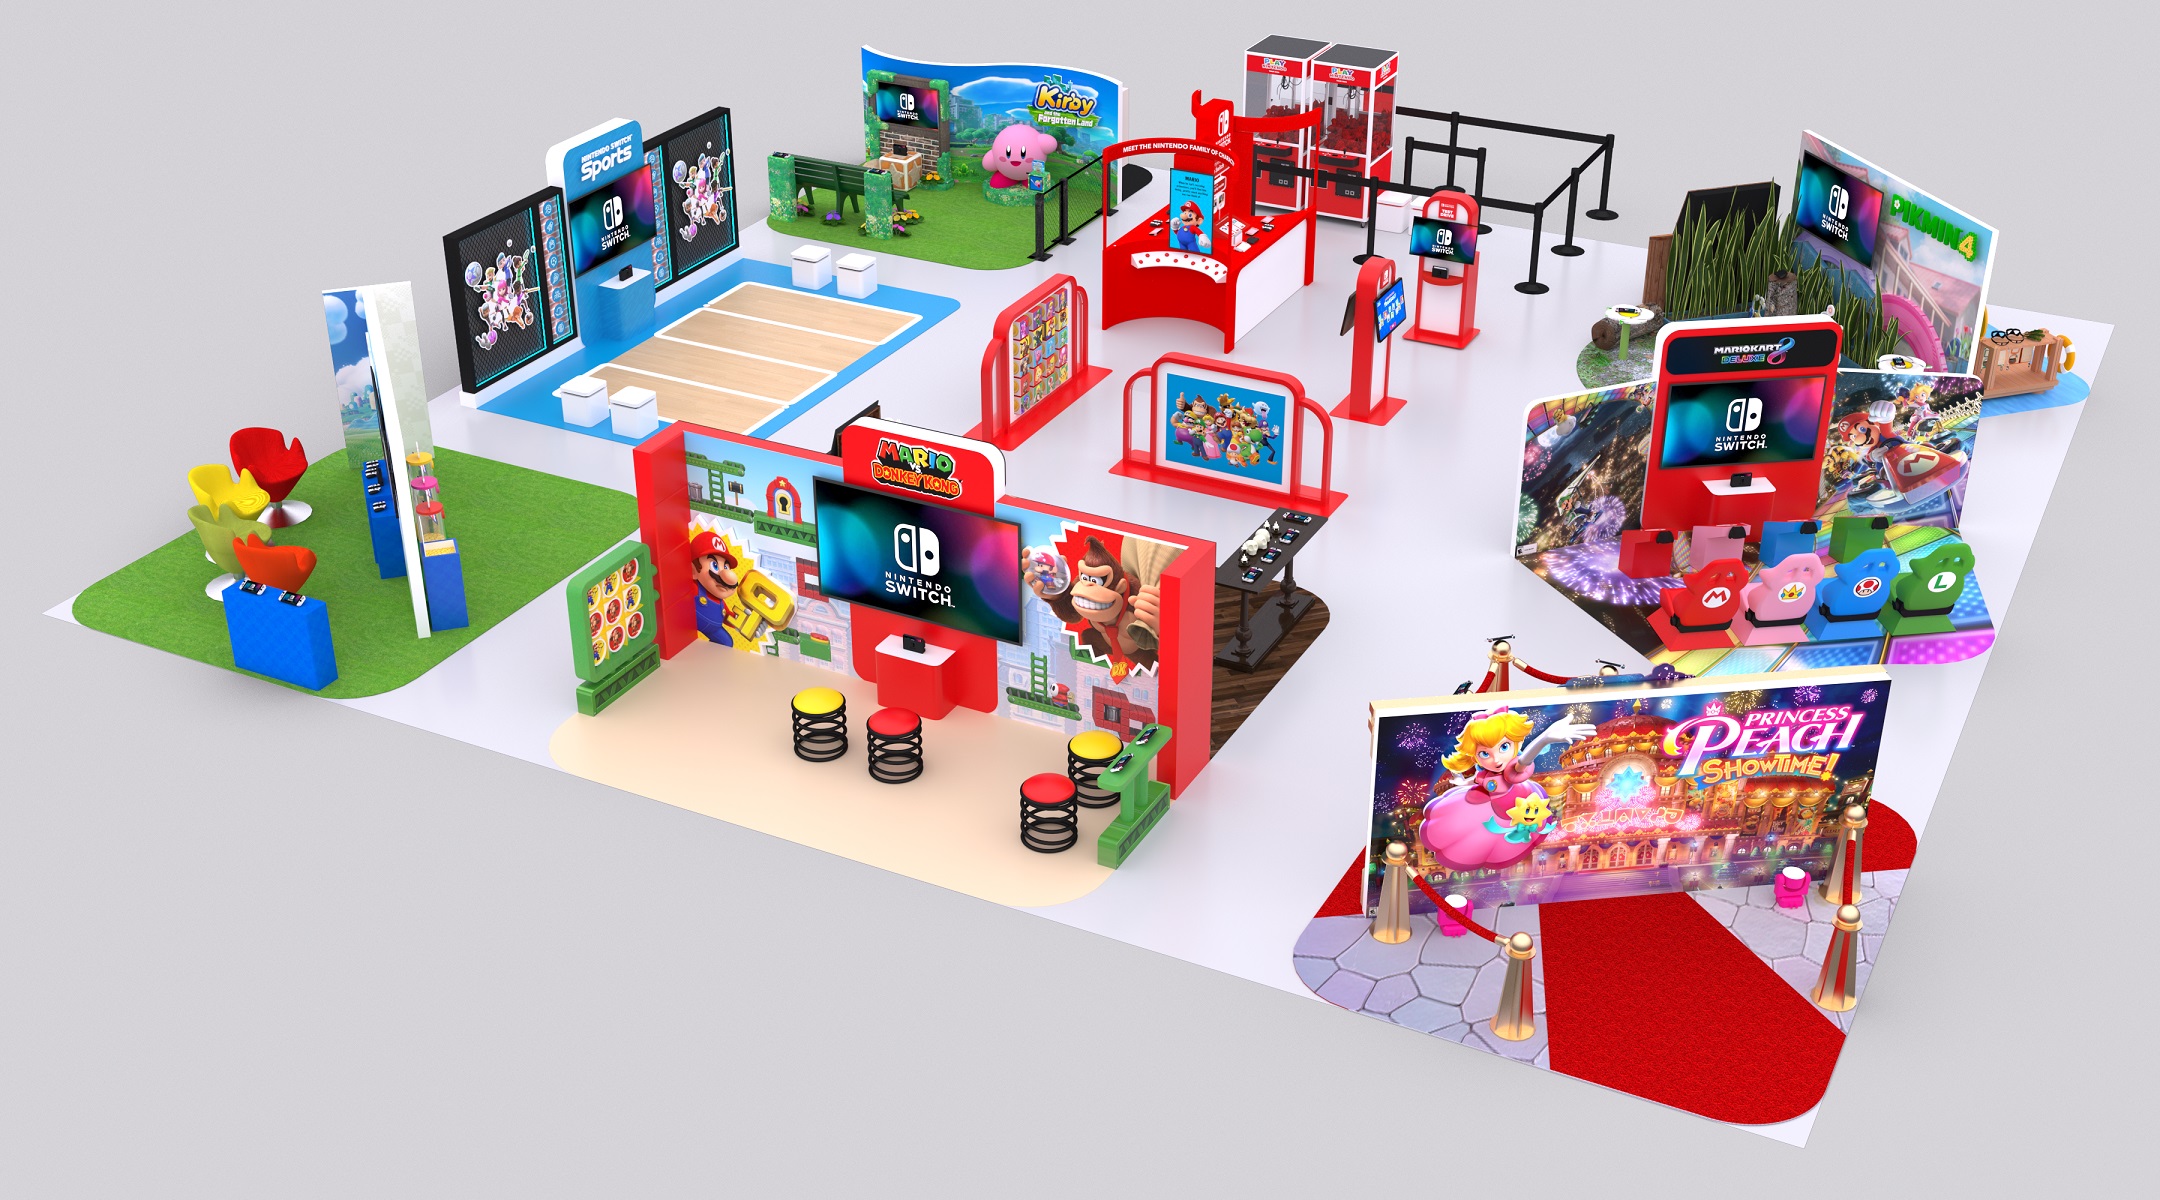 Play Nintendo Tour brings family activity center across the US